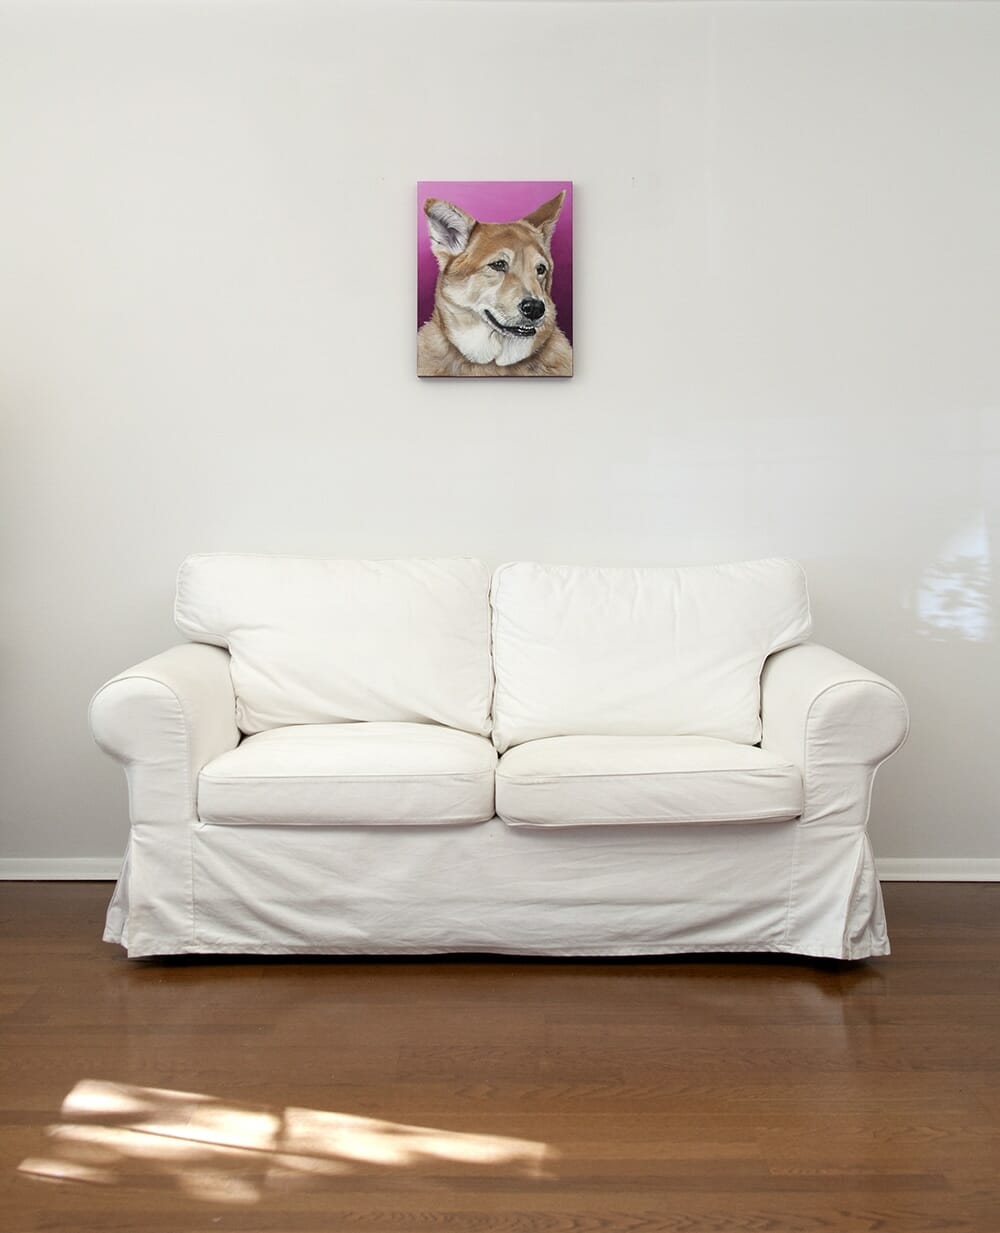 Custom dog portrait of a german sheperd and chow mix dog by fine arts painter Erica Eriksdotter